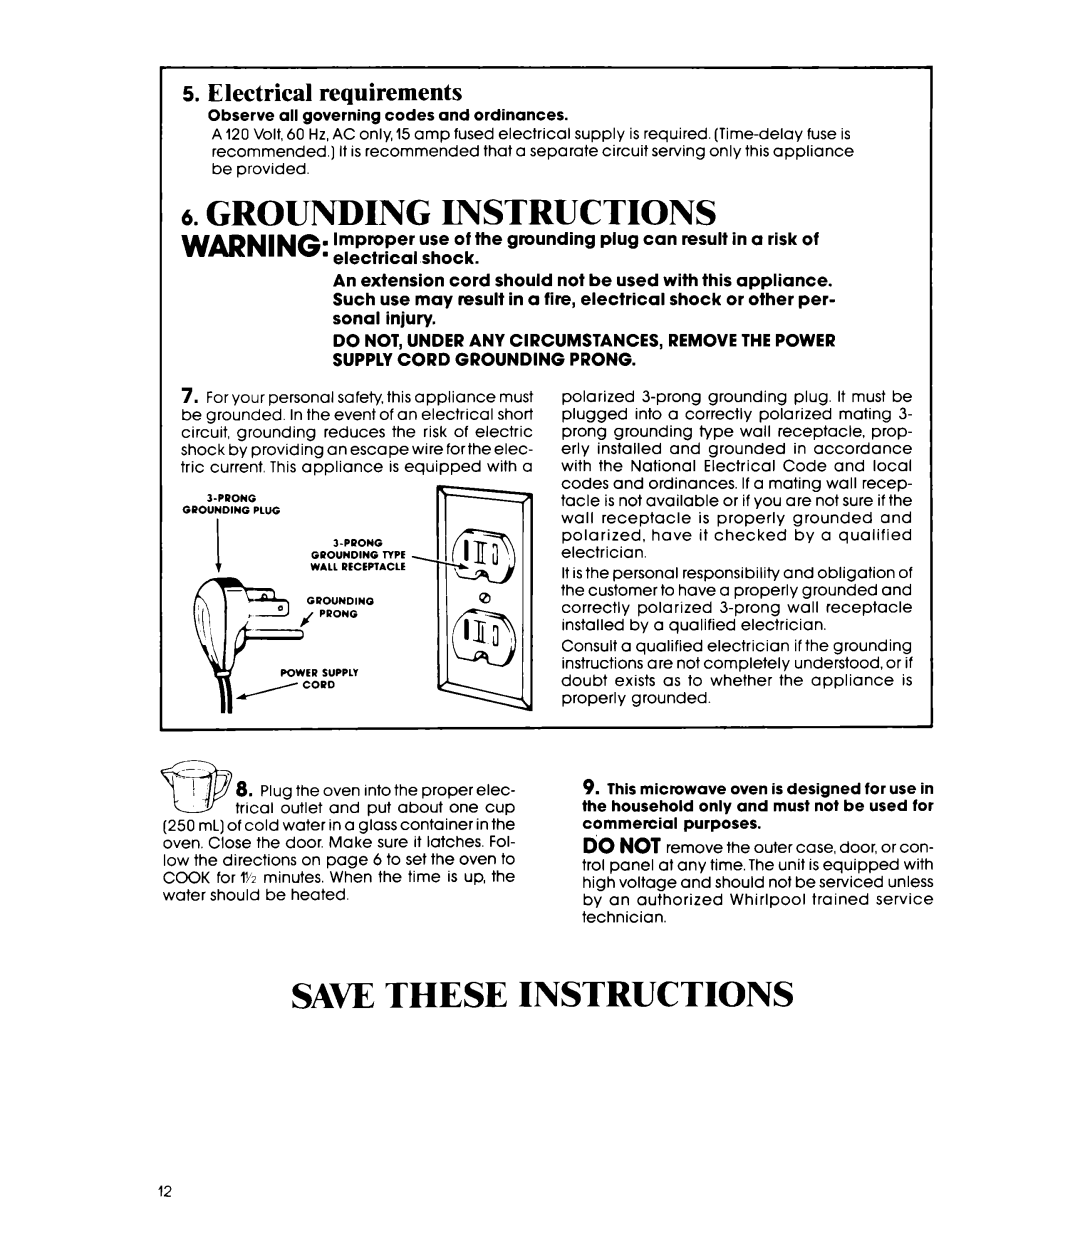 Whirlpool MW8300XP manual Grounding Instructions, Saw These Instructions, Electrical requirements 